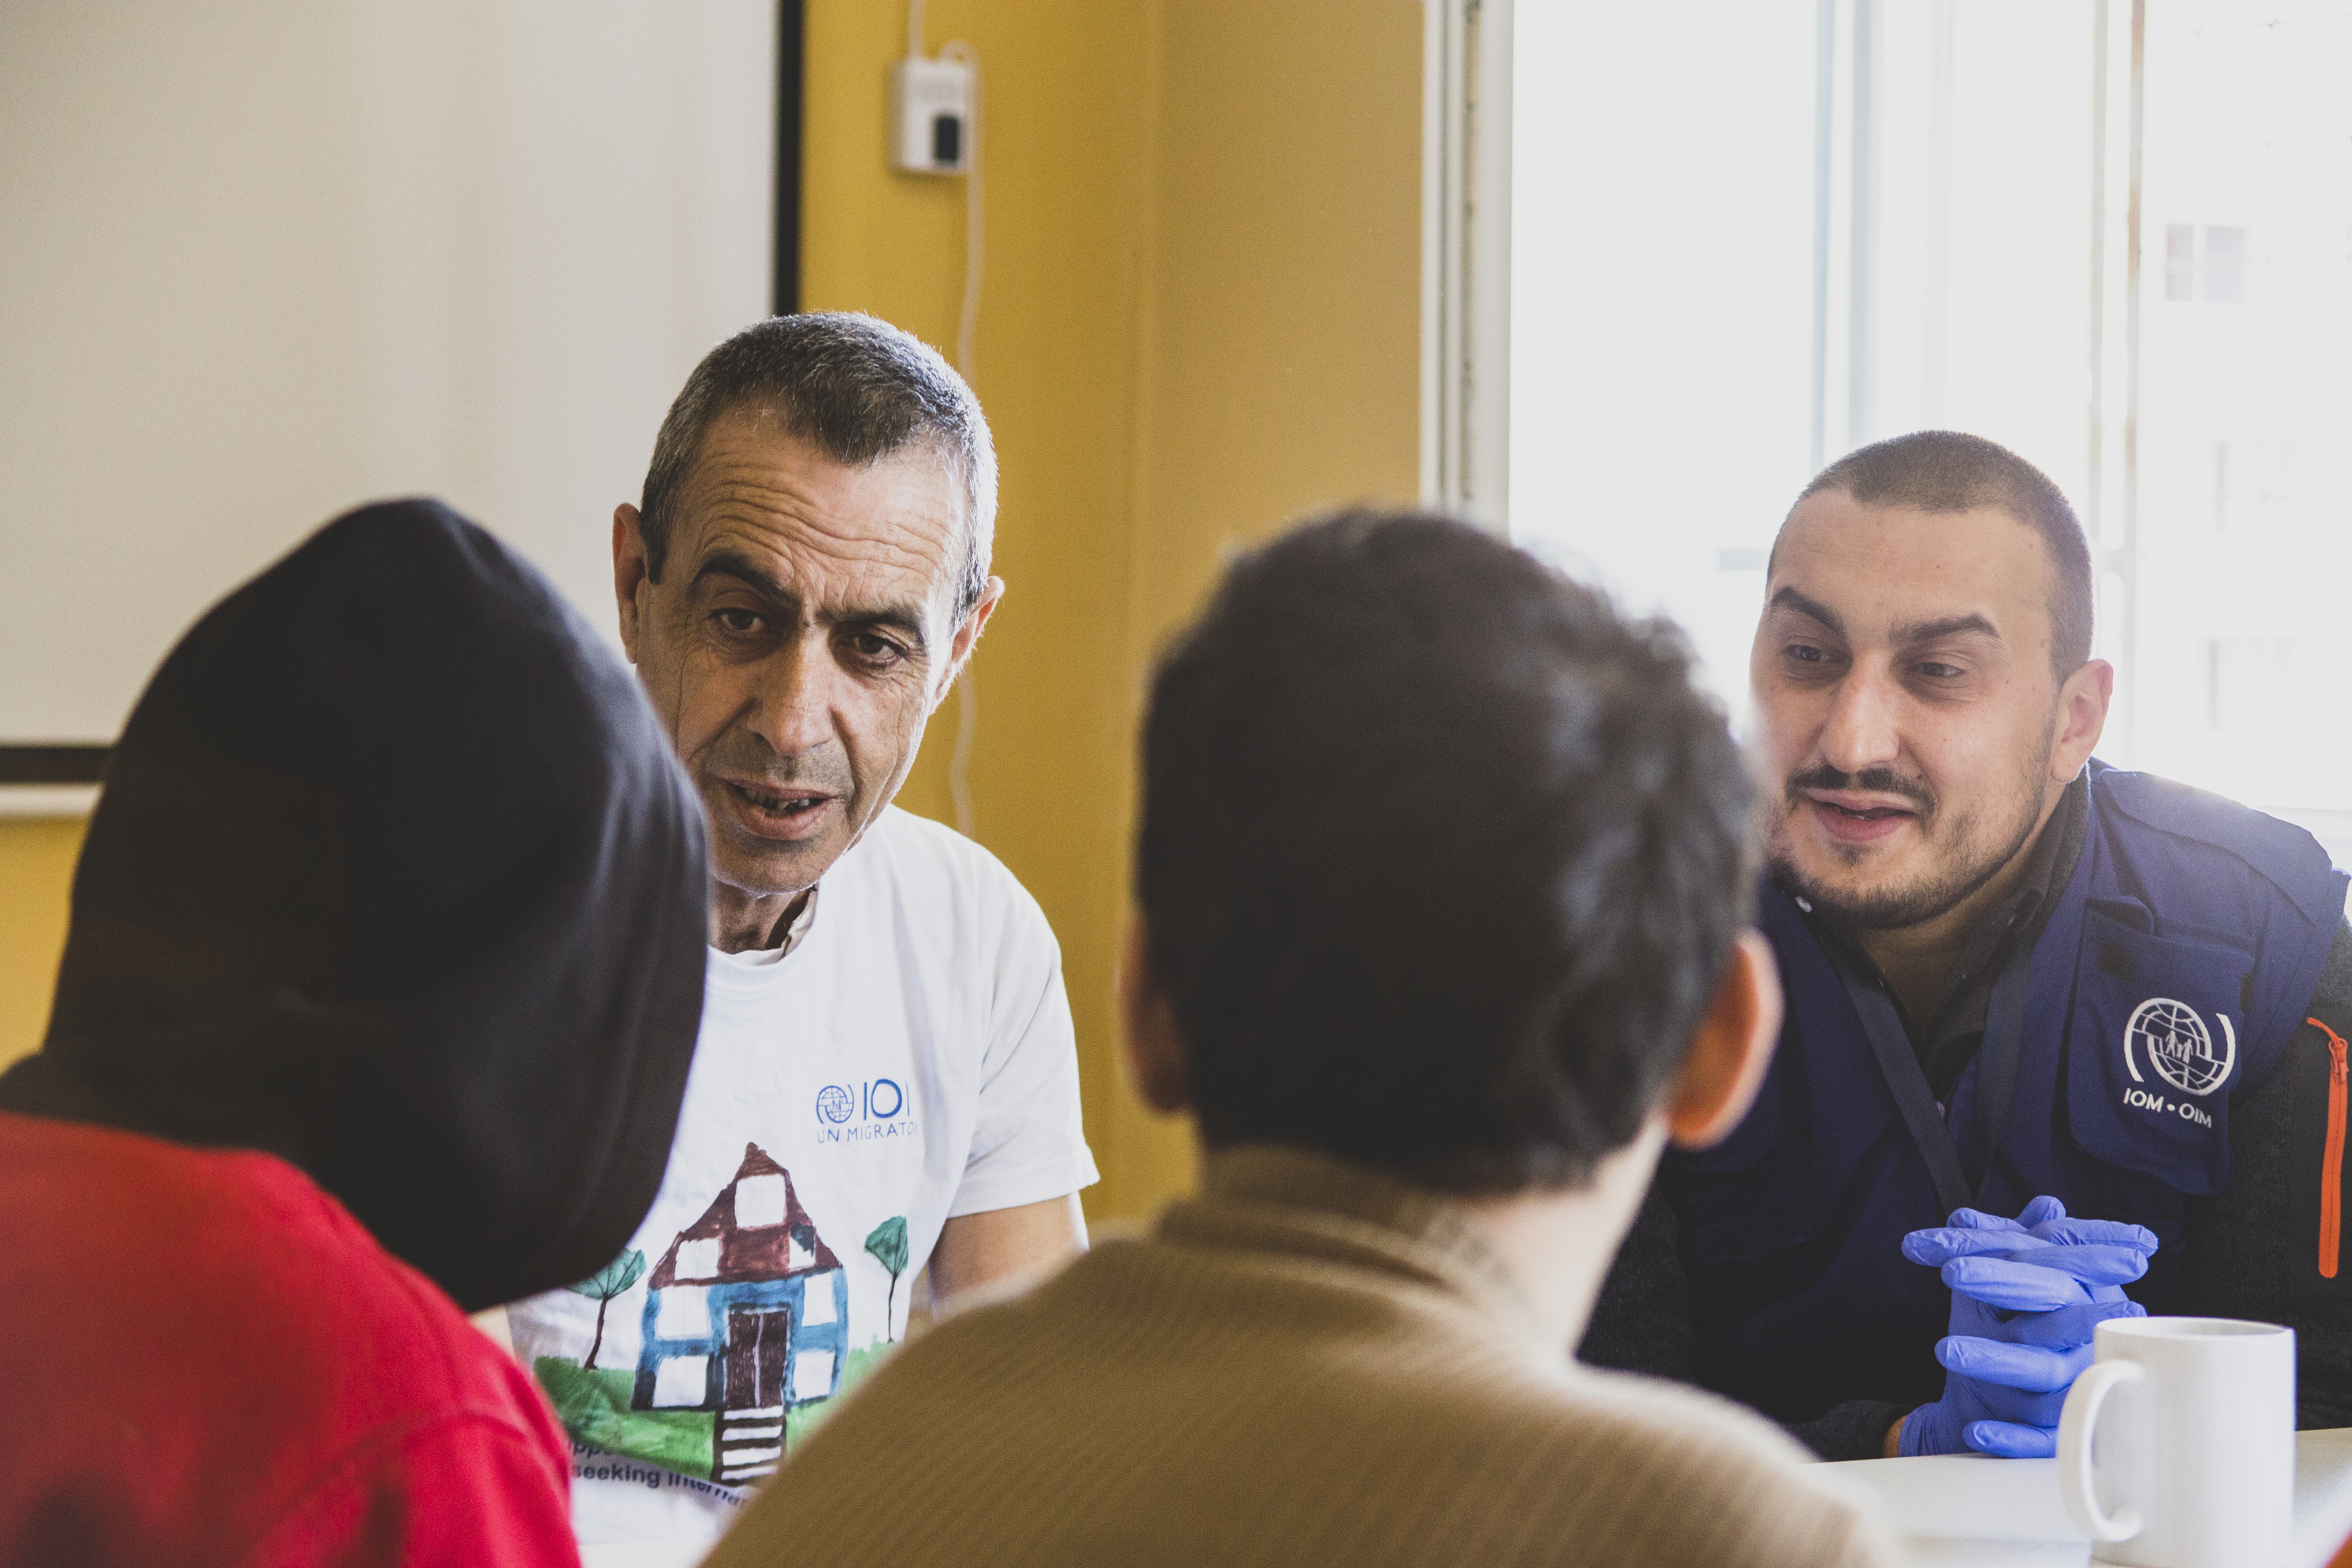 IOM staff during a discussion with the unaccompanied minors at RRC Sofia - Ovcha Kupel